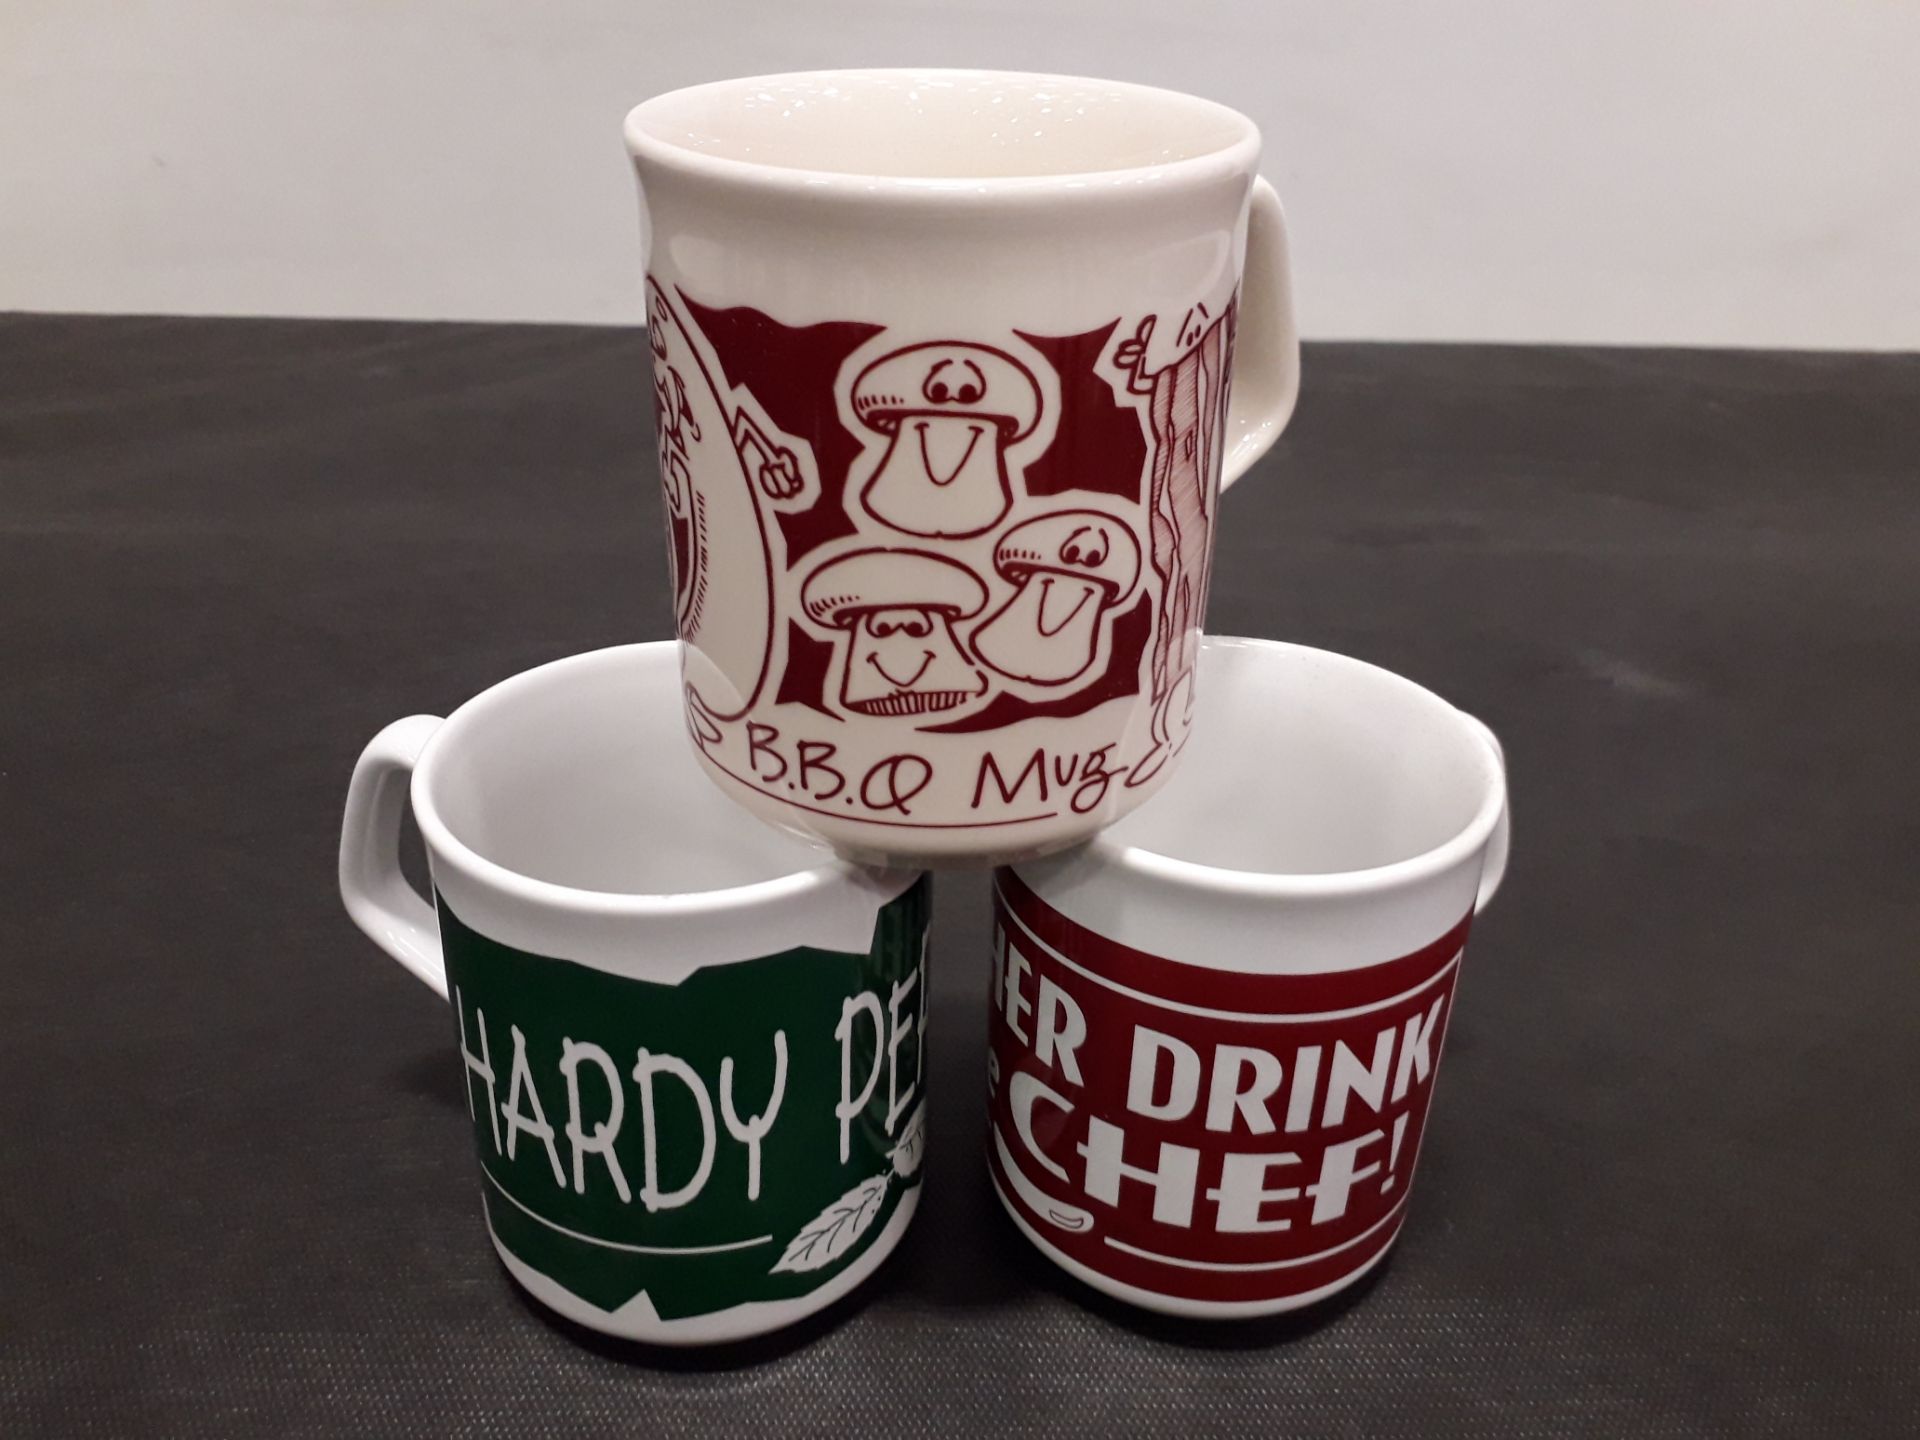 400 + BRAND NEW MUGS TO INCLUDE OFFICIAL BBQ MUG , HARDY PERENNIAL , ANOTHER FOR THE CHEF , HIS